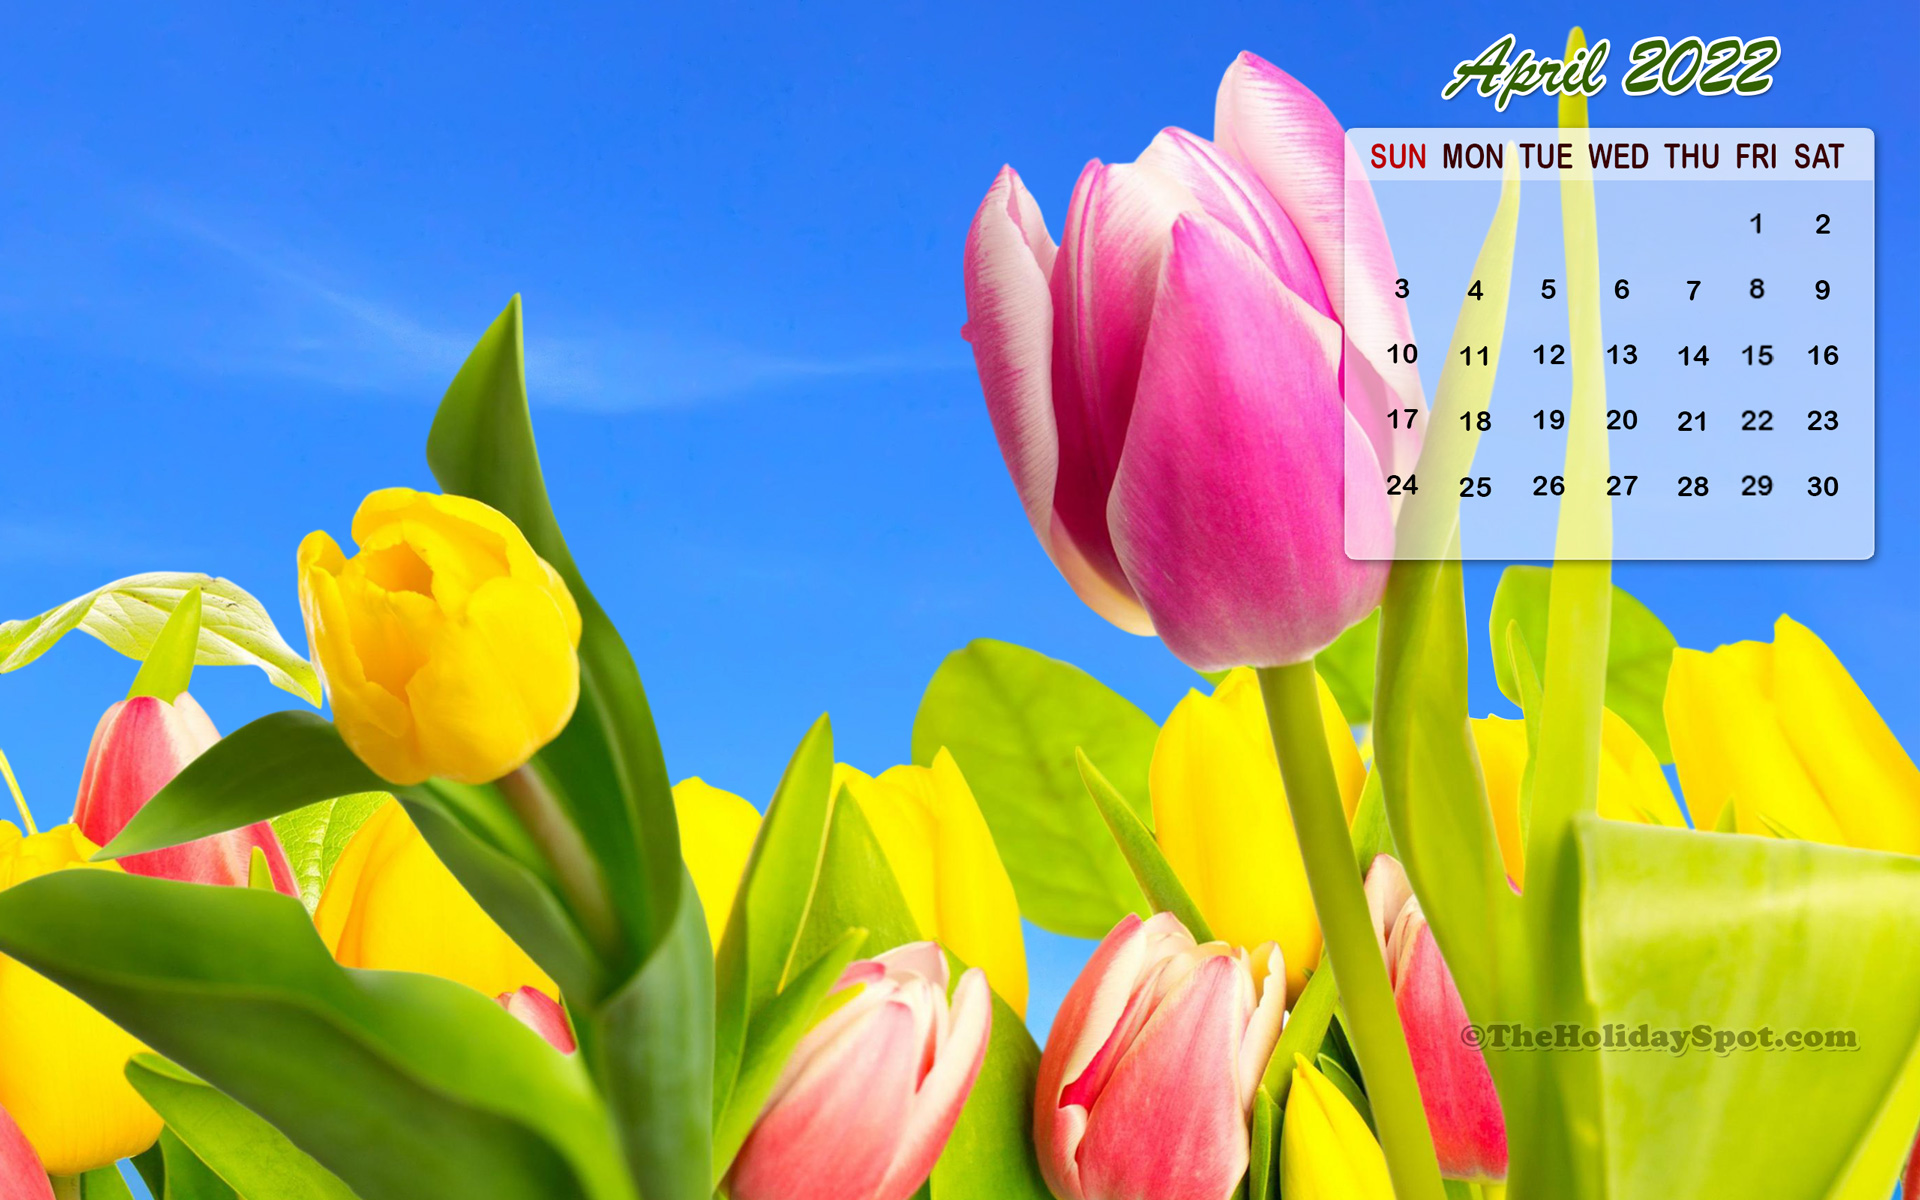 26 April 2022 calendar printable designs that are truly cute  Blush Bossing